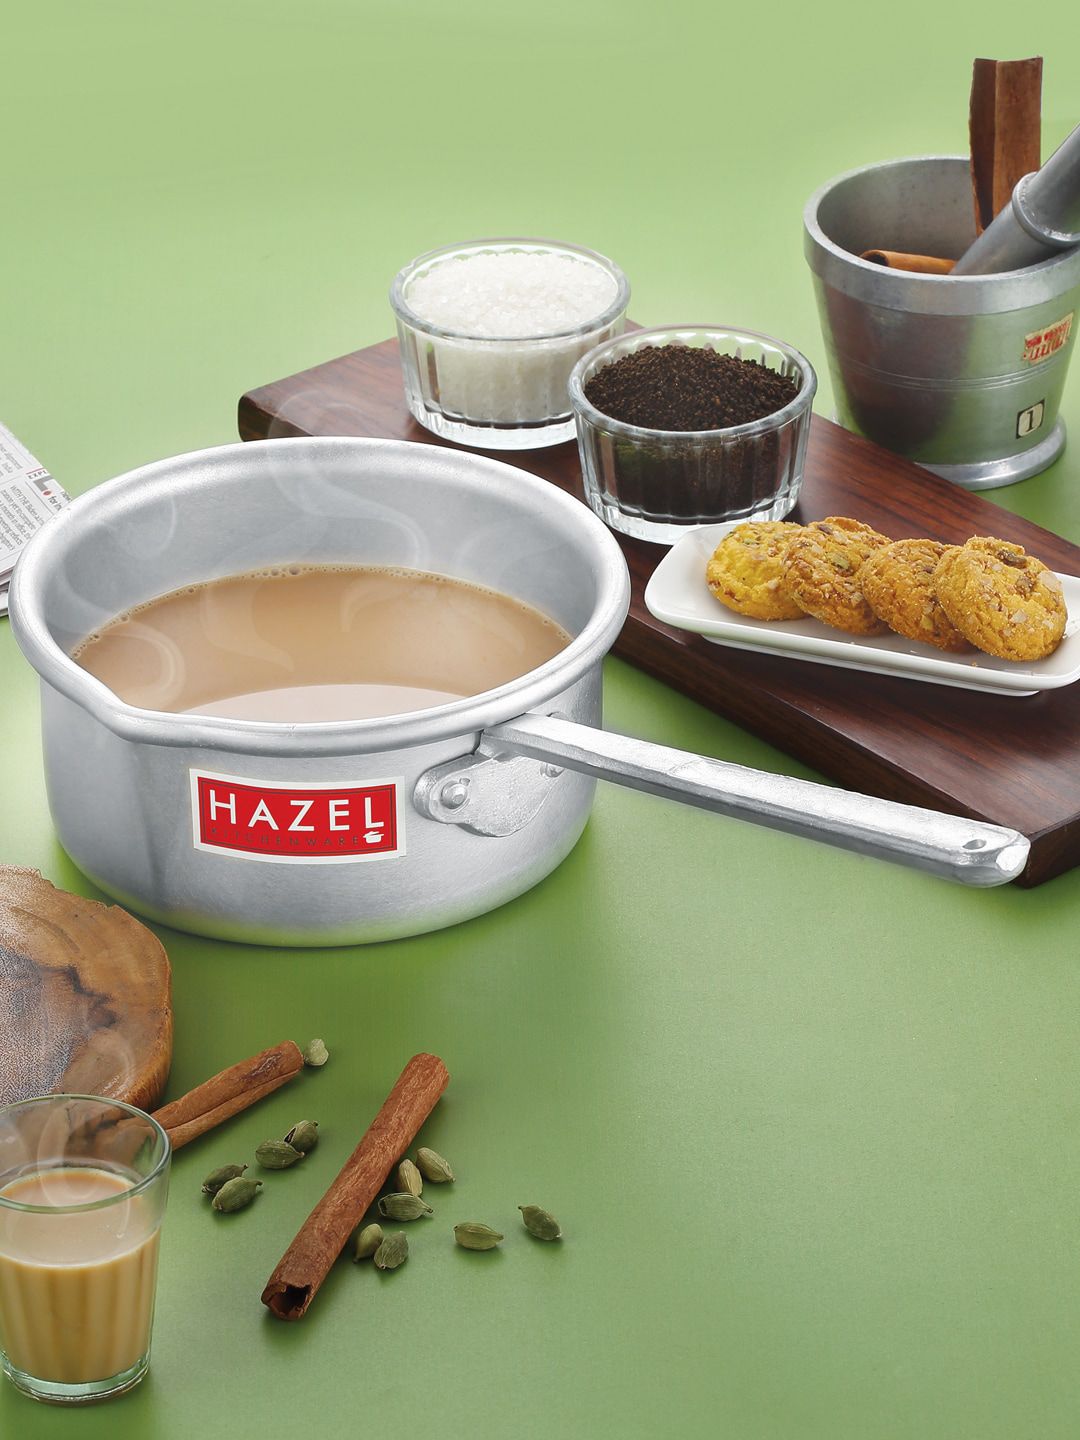 HAZEL Silver-Toned Solid Saucepan 2600 Ml Price in India